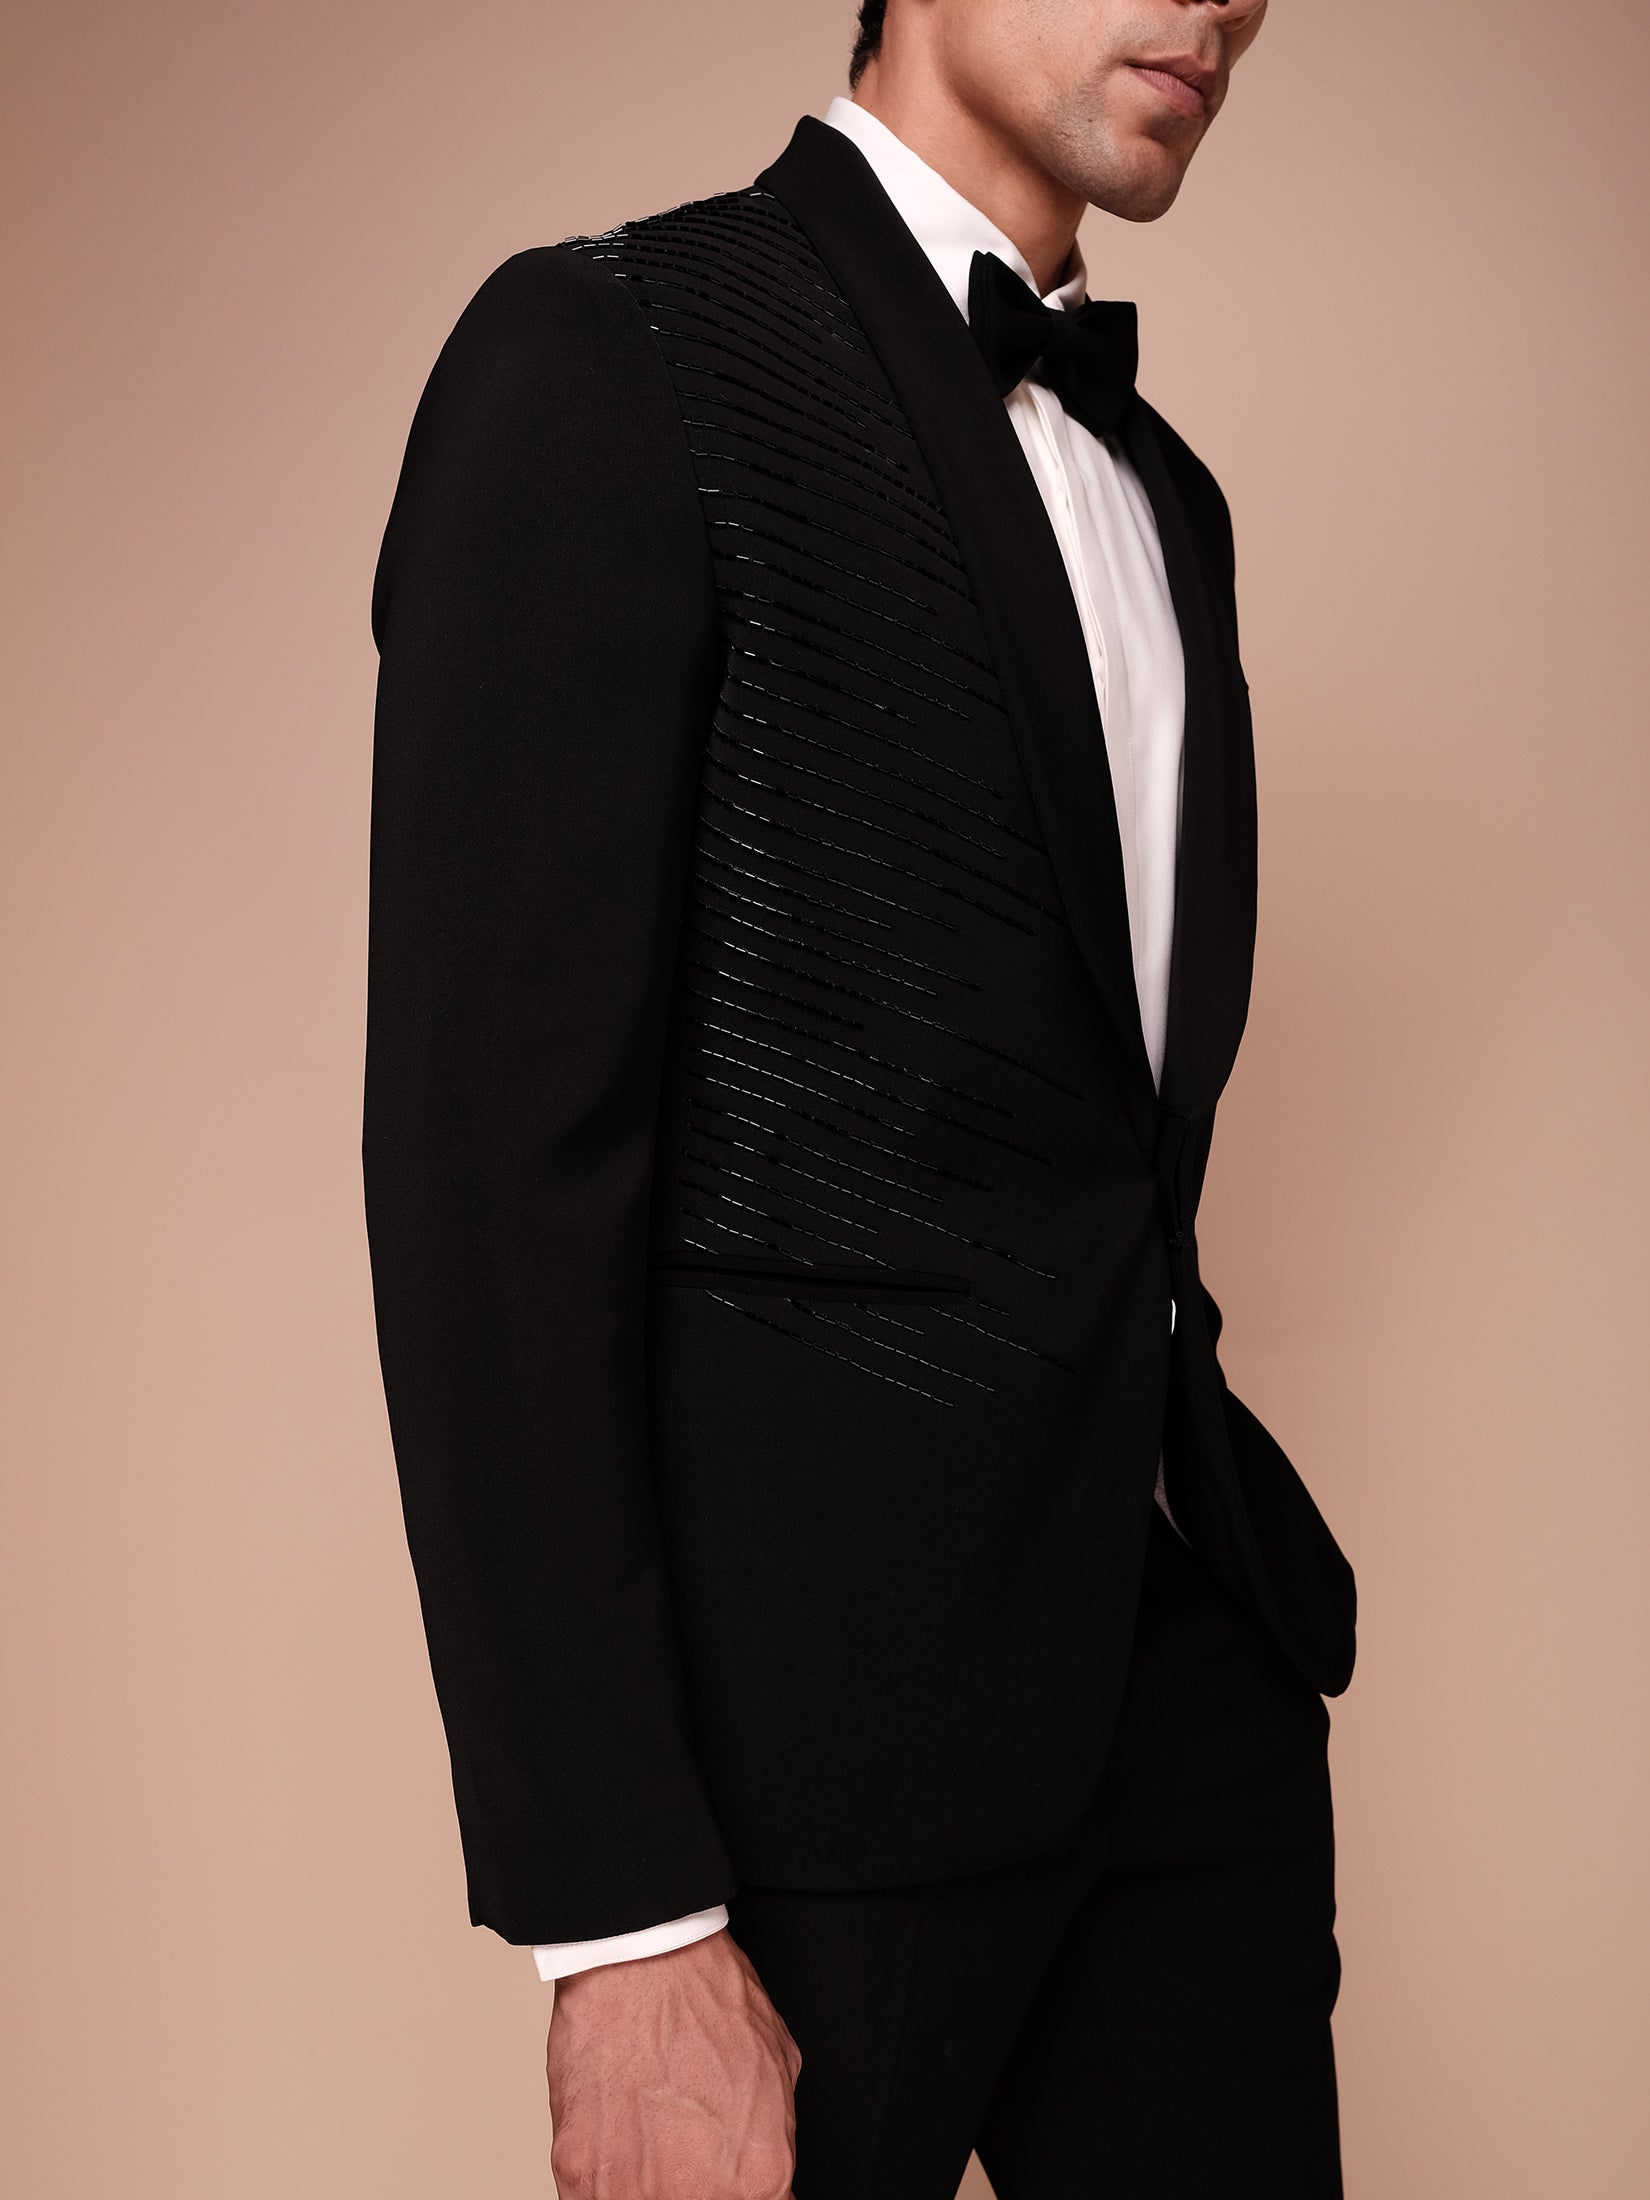 Black Shawl Lapel Tuxedo With Embroidered One Side Diagonal Strokes Paired With Trousers And Tonal Shirt